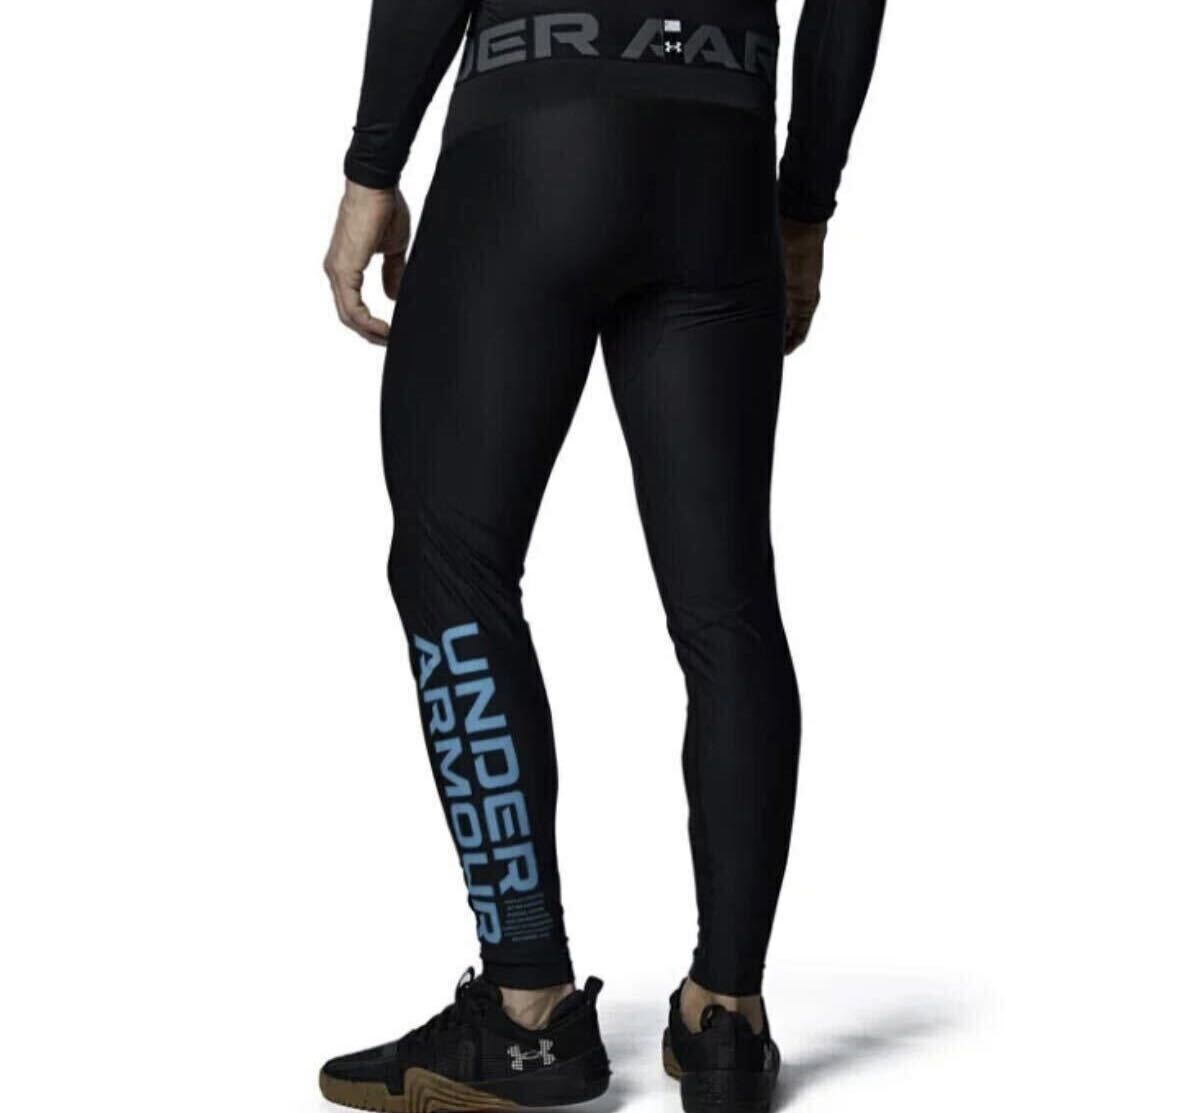 [ new goods ] Under Armor heat gear armor - compression long tights leggings 